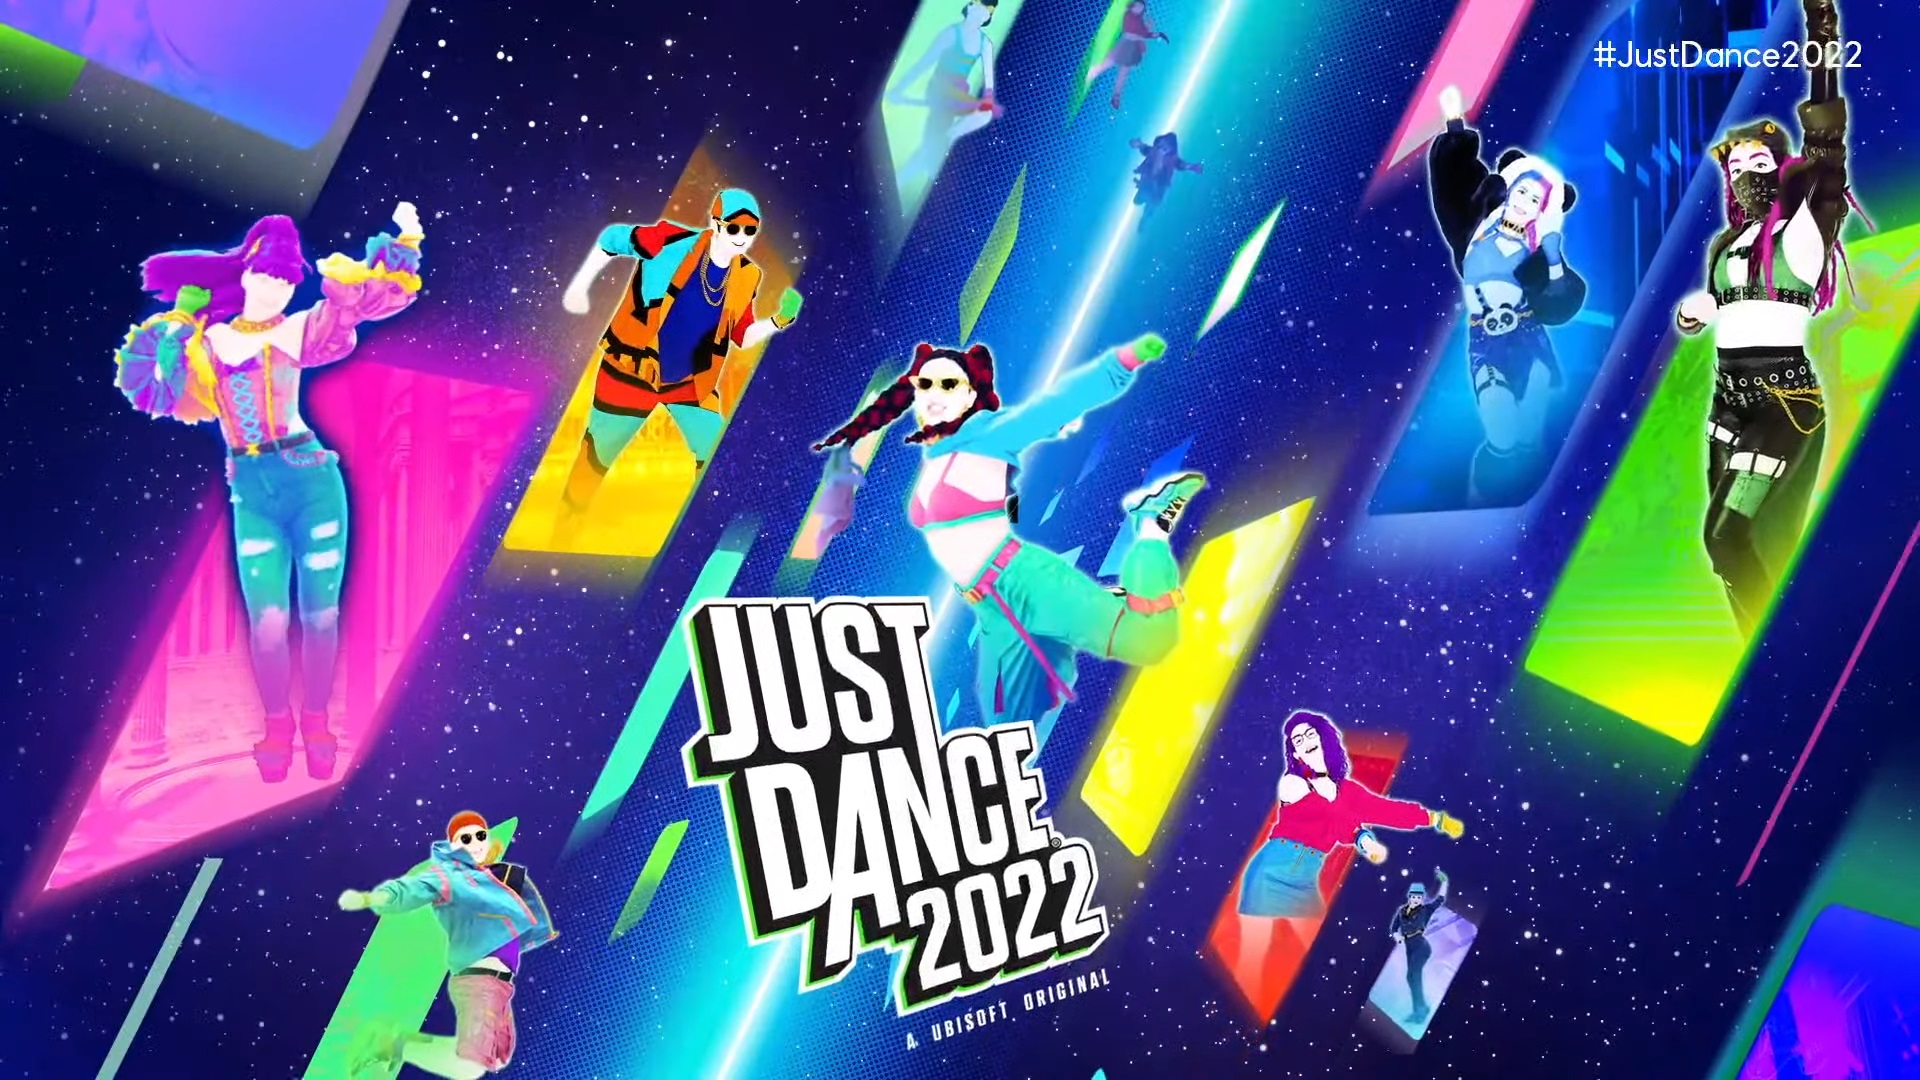 What is the release date of Just Dance 2022?